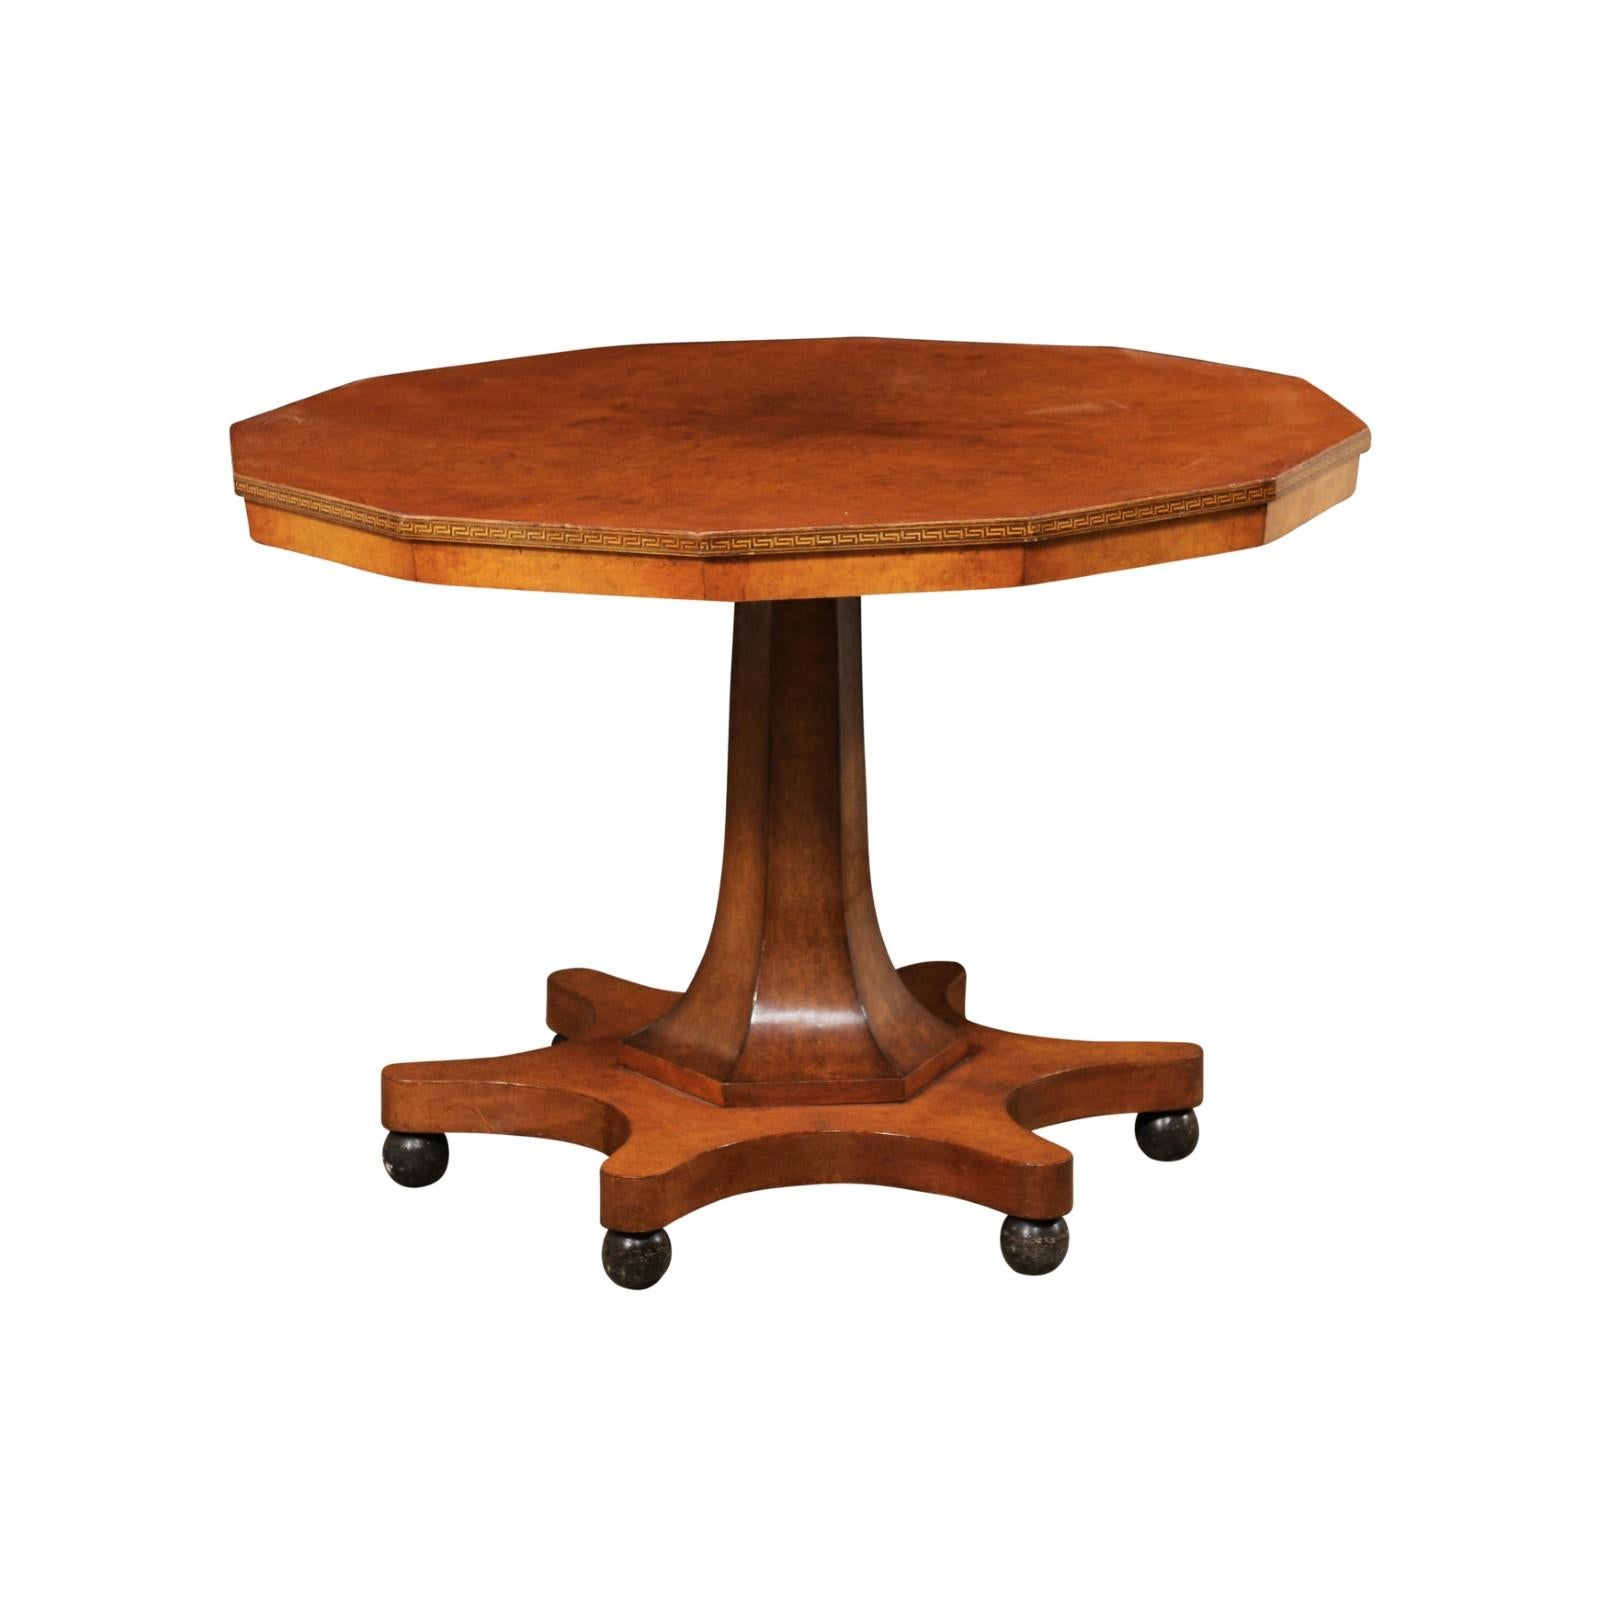 A Swedish shapely wooden pedestal table from the mid 20th century. This mid-century center table from Sweden has a unique dodecagon shape (a 12-sided polygon) at it's top, with a Greek key trim outlining it's perimeter, which supported atop an